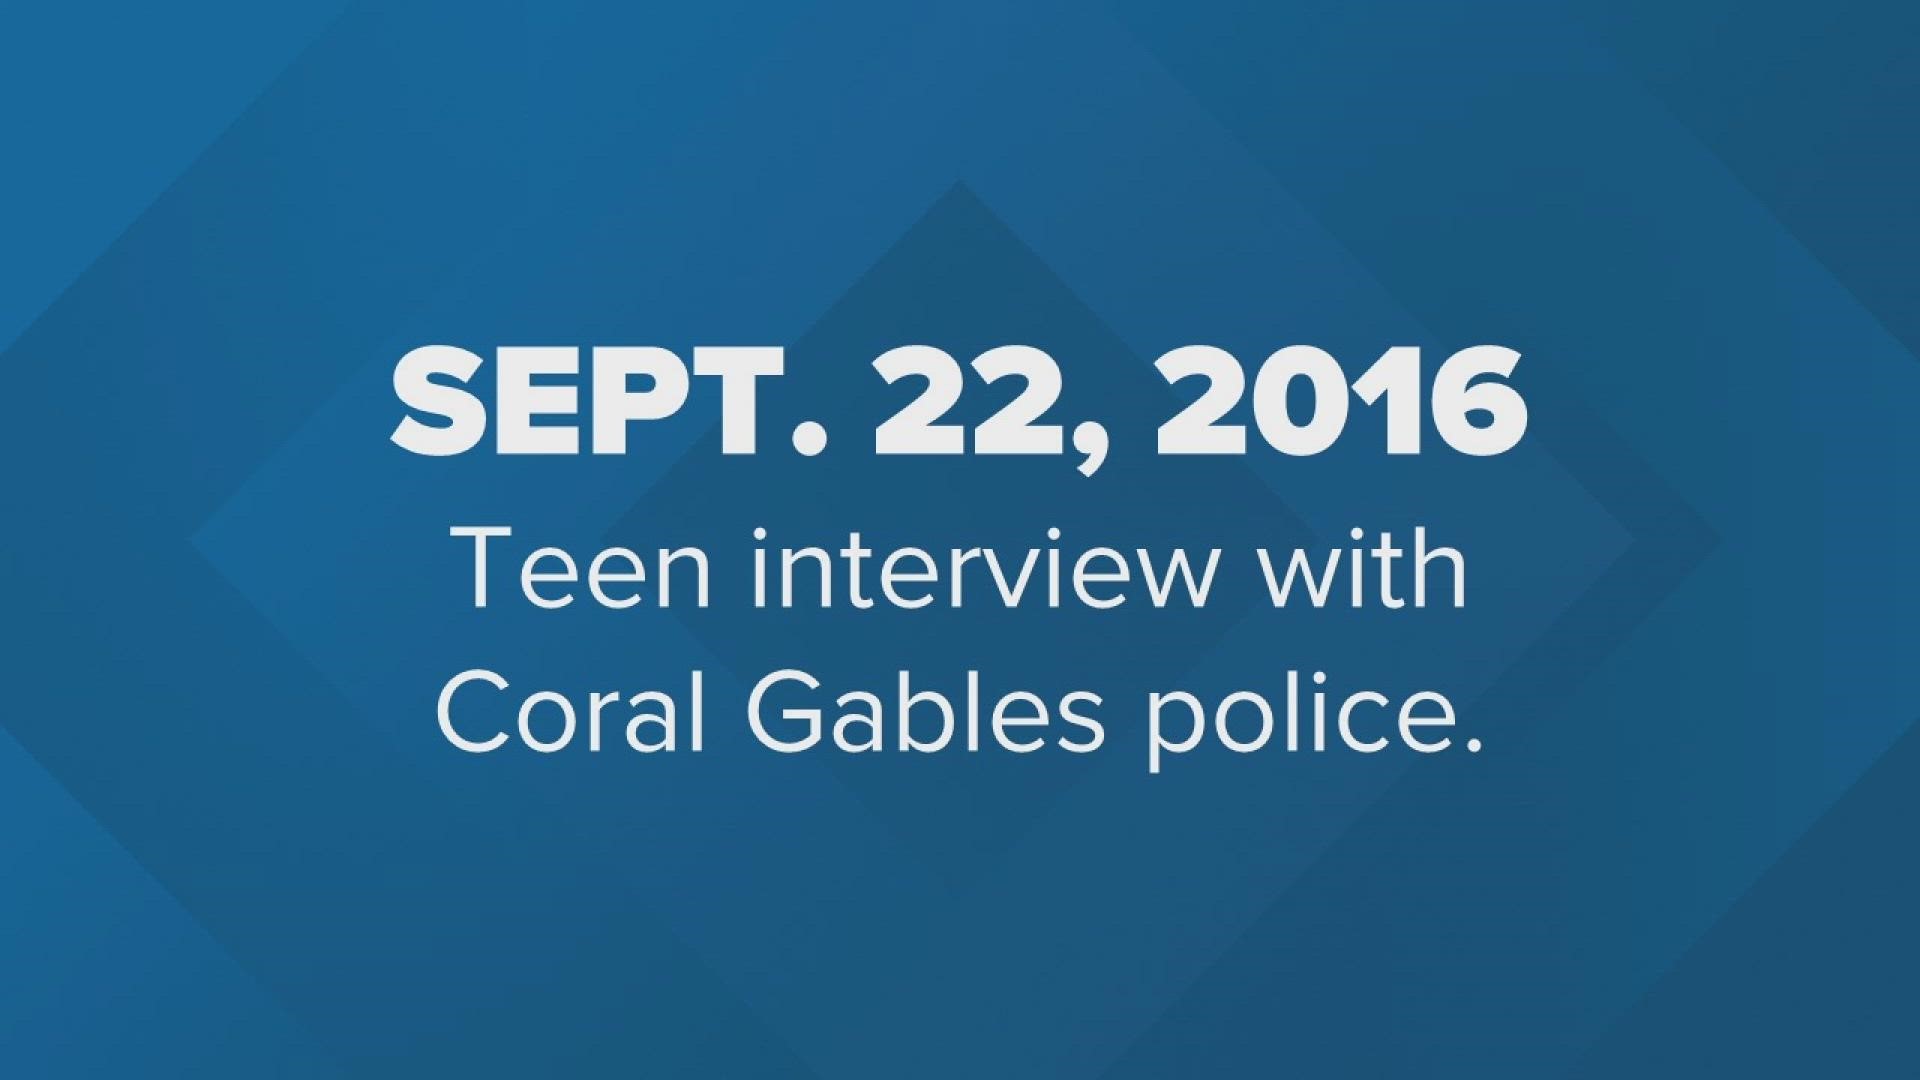 On Sept. 22, 2016, a teenager tried to run from police after being pulled over in Coral Gables, a suburb outside of Miami.